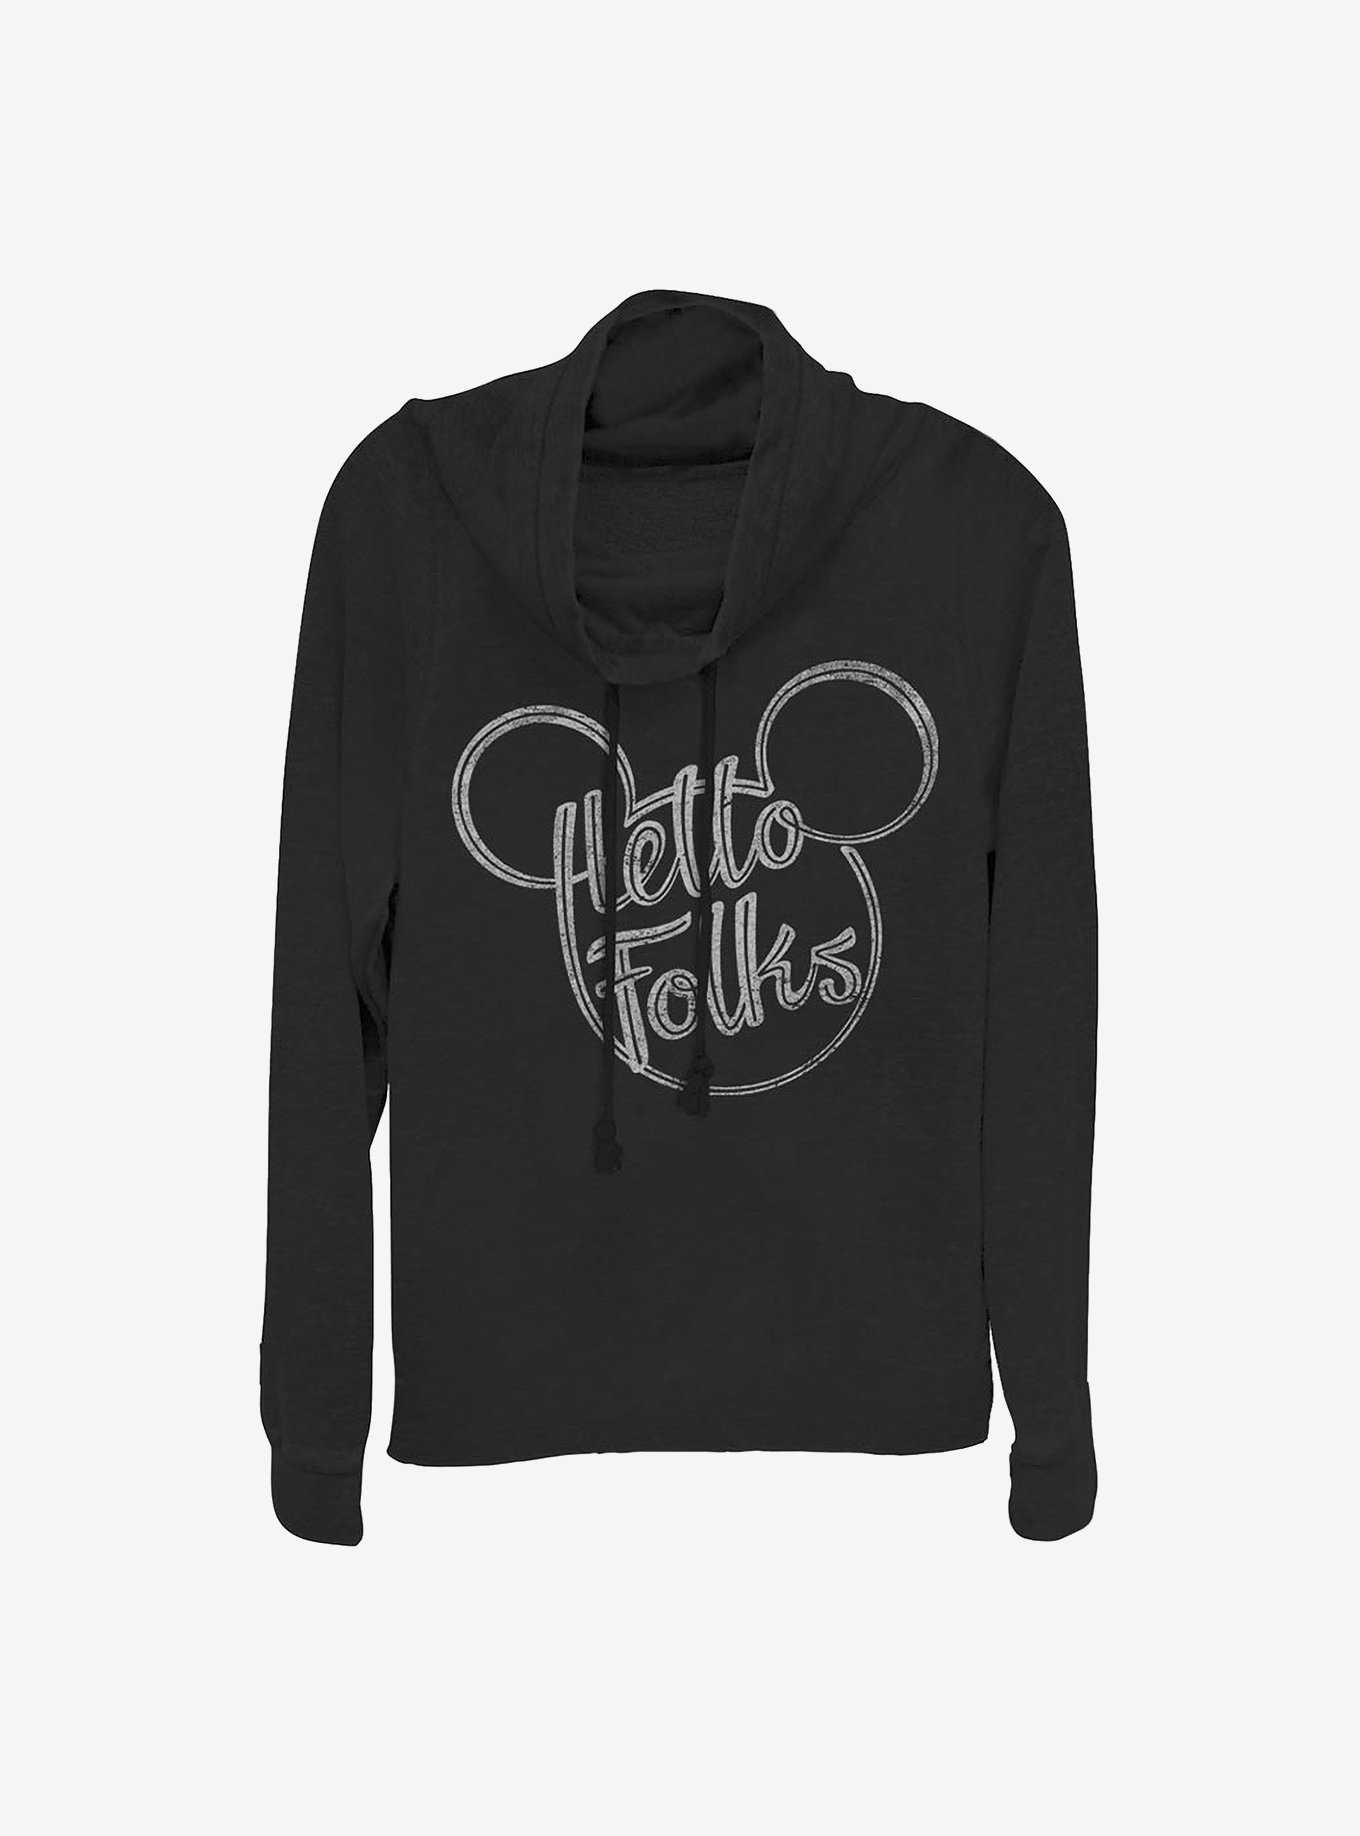 Disney Mickey Mouse Hello Folks Cowlneck Long-Sleeve Girls Top, , hi-res